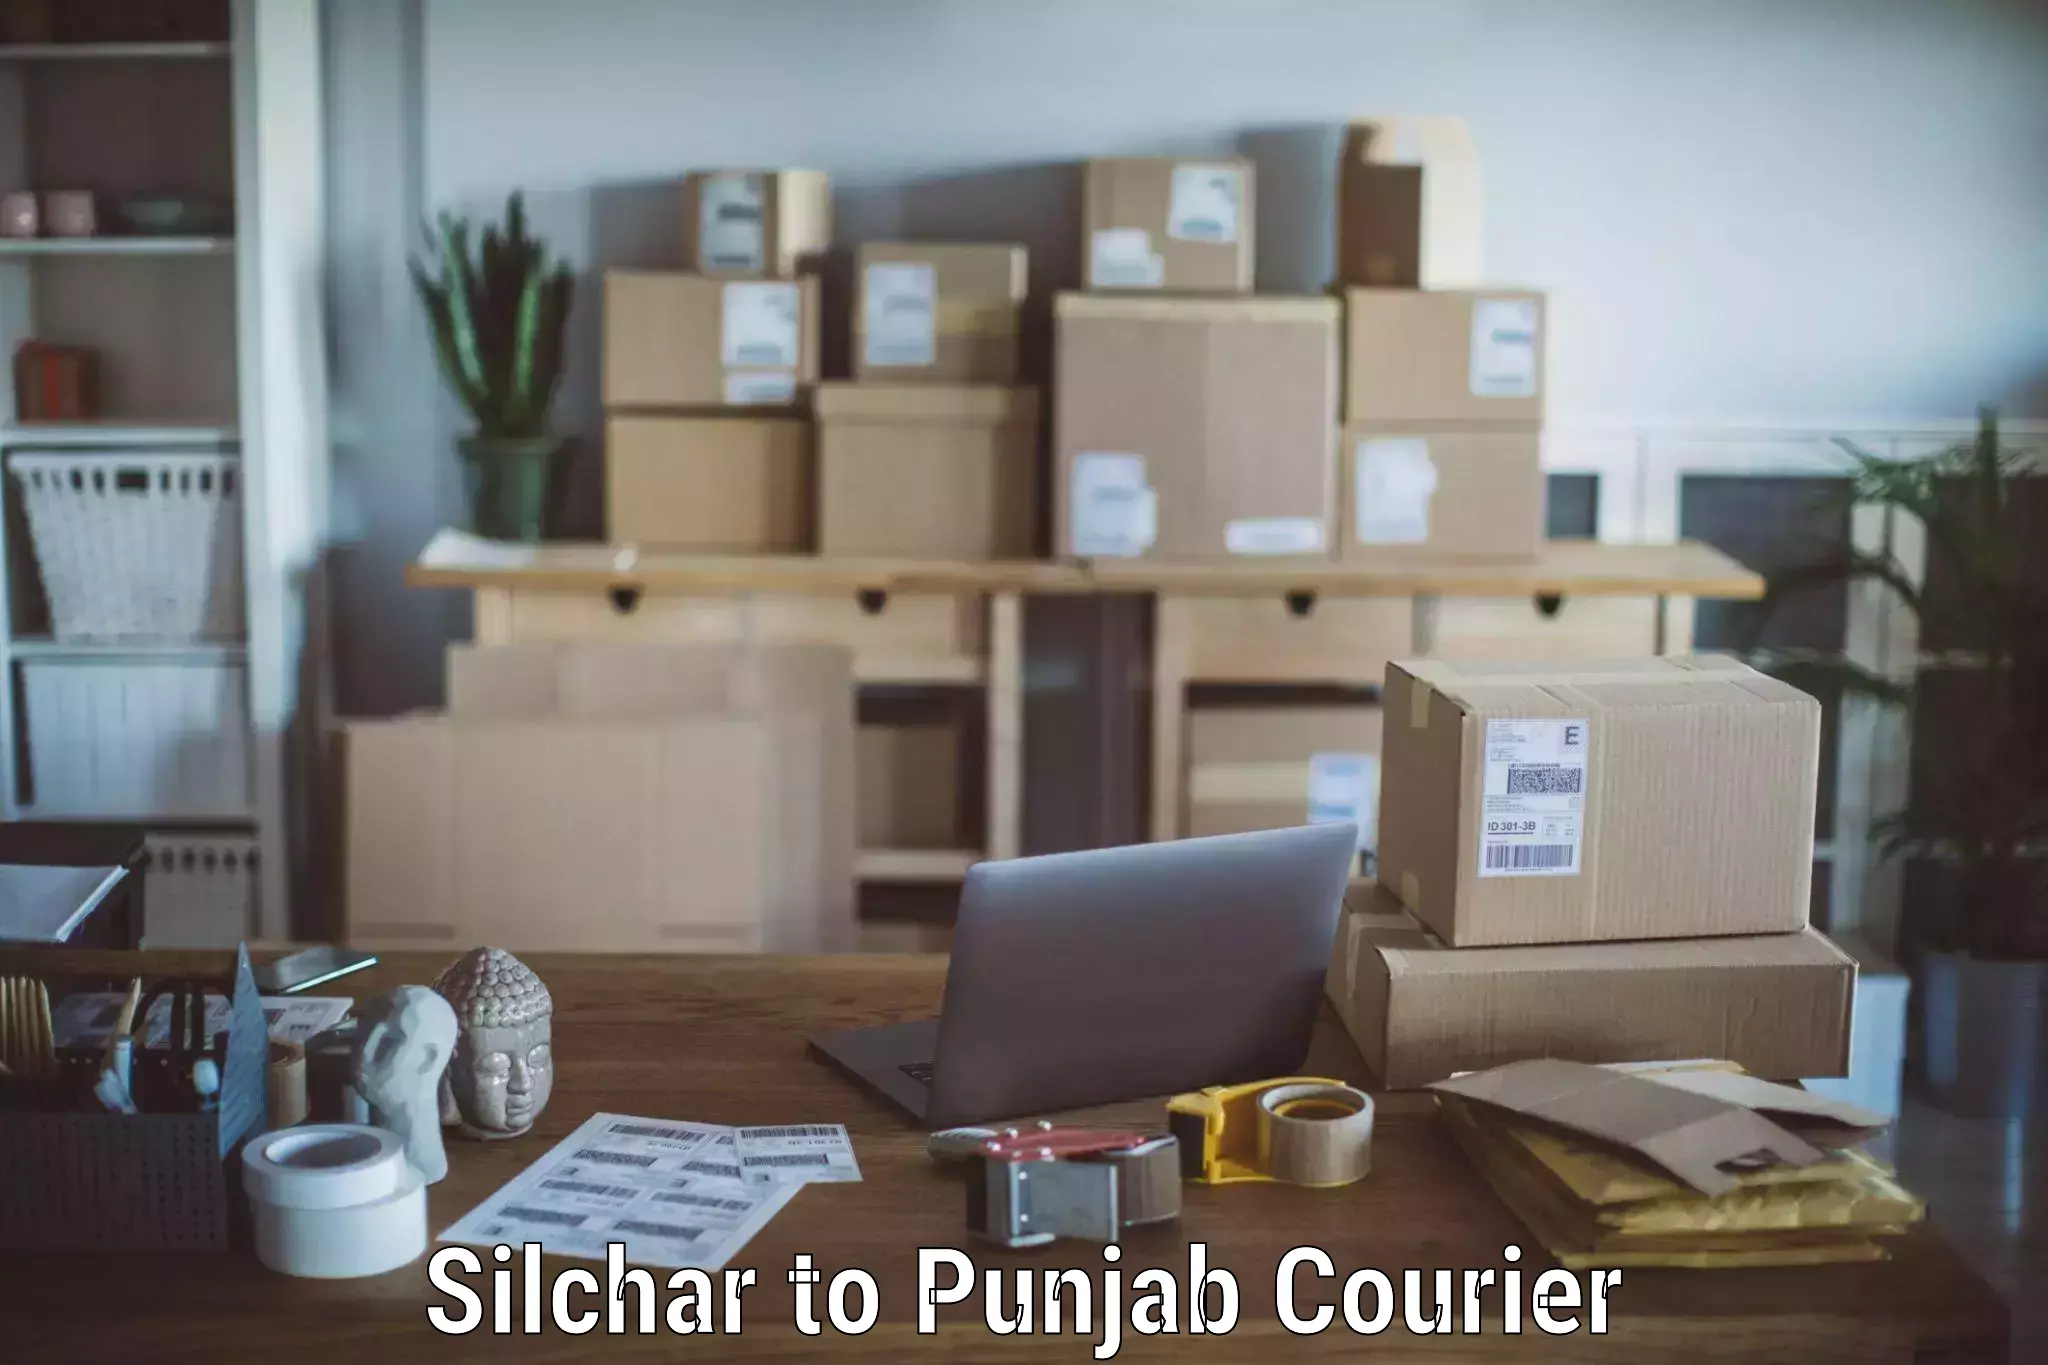 Household moving experts Silchar to Amritsar